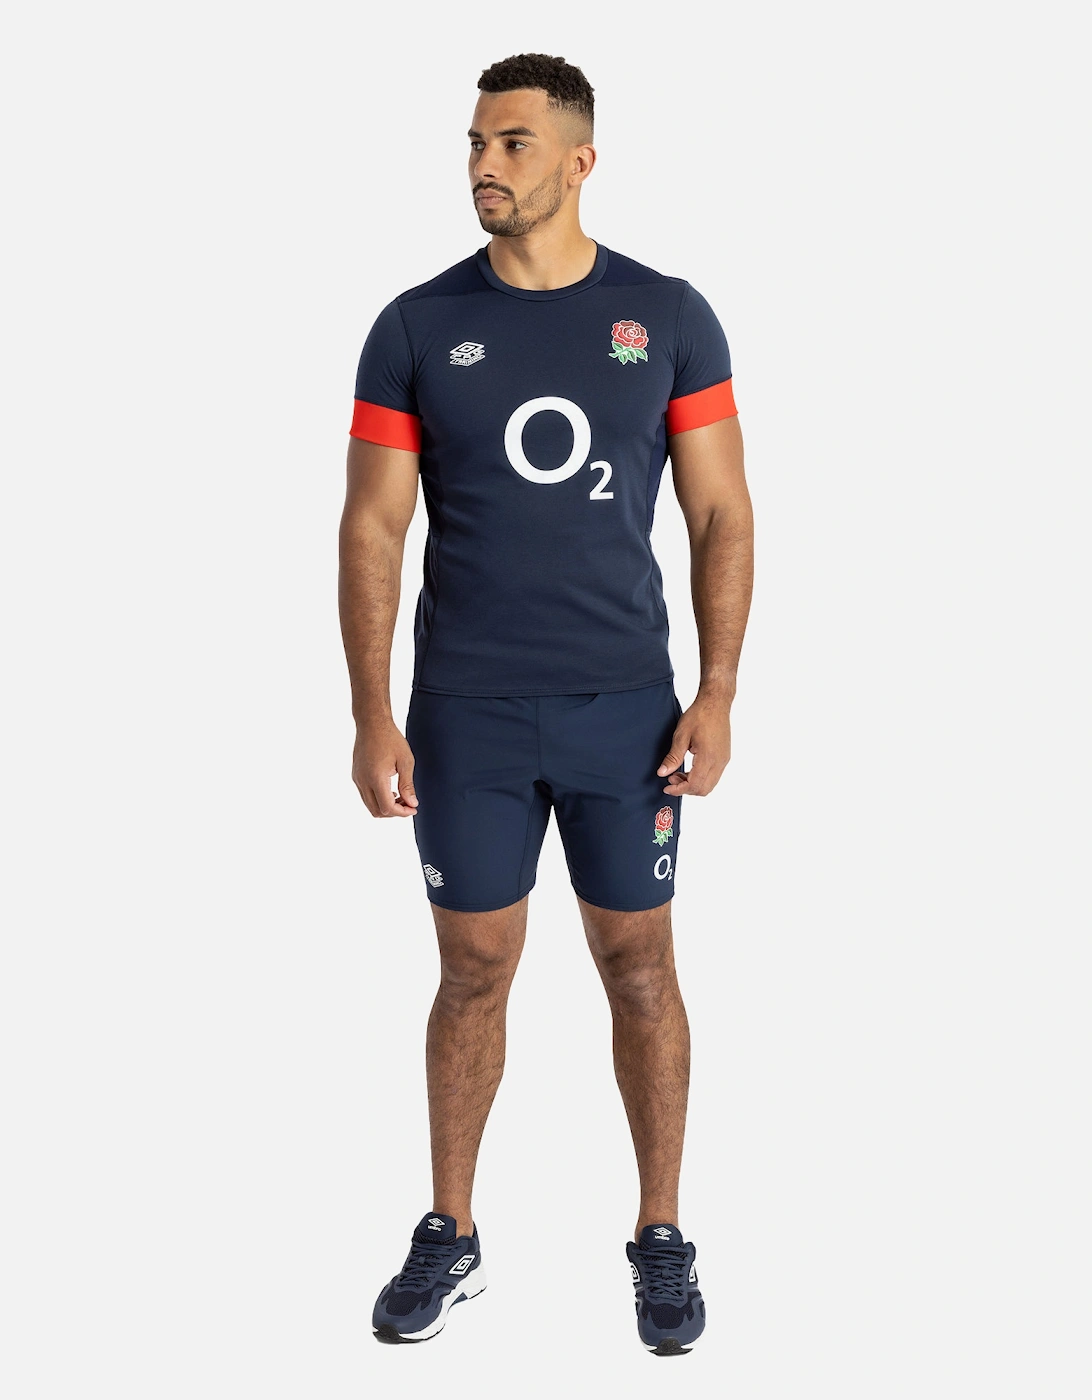 Mens 23/24 England Rugby Relaxed Fit Training Jersey